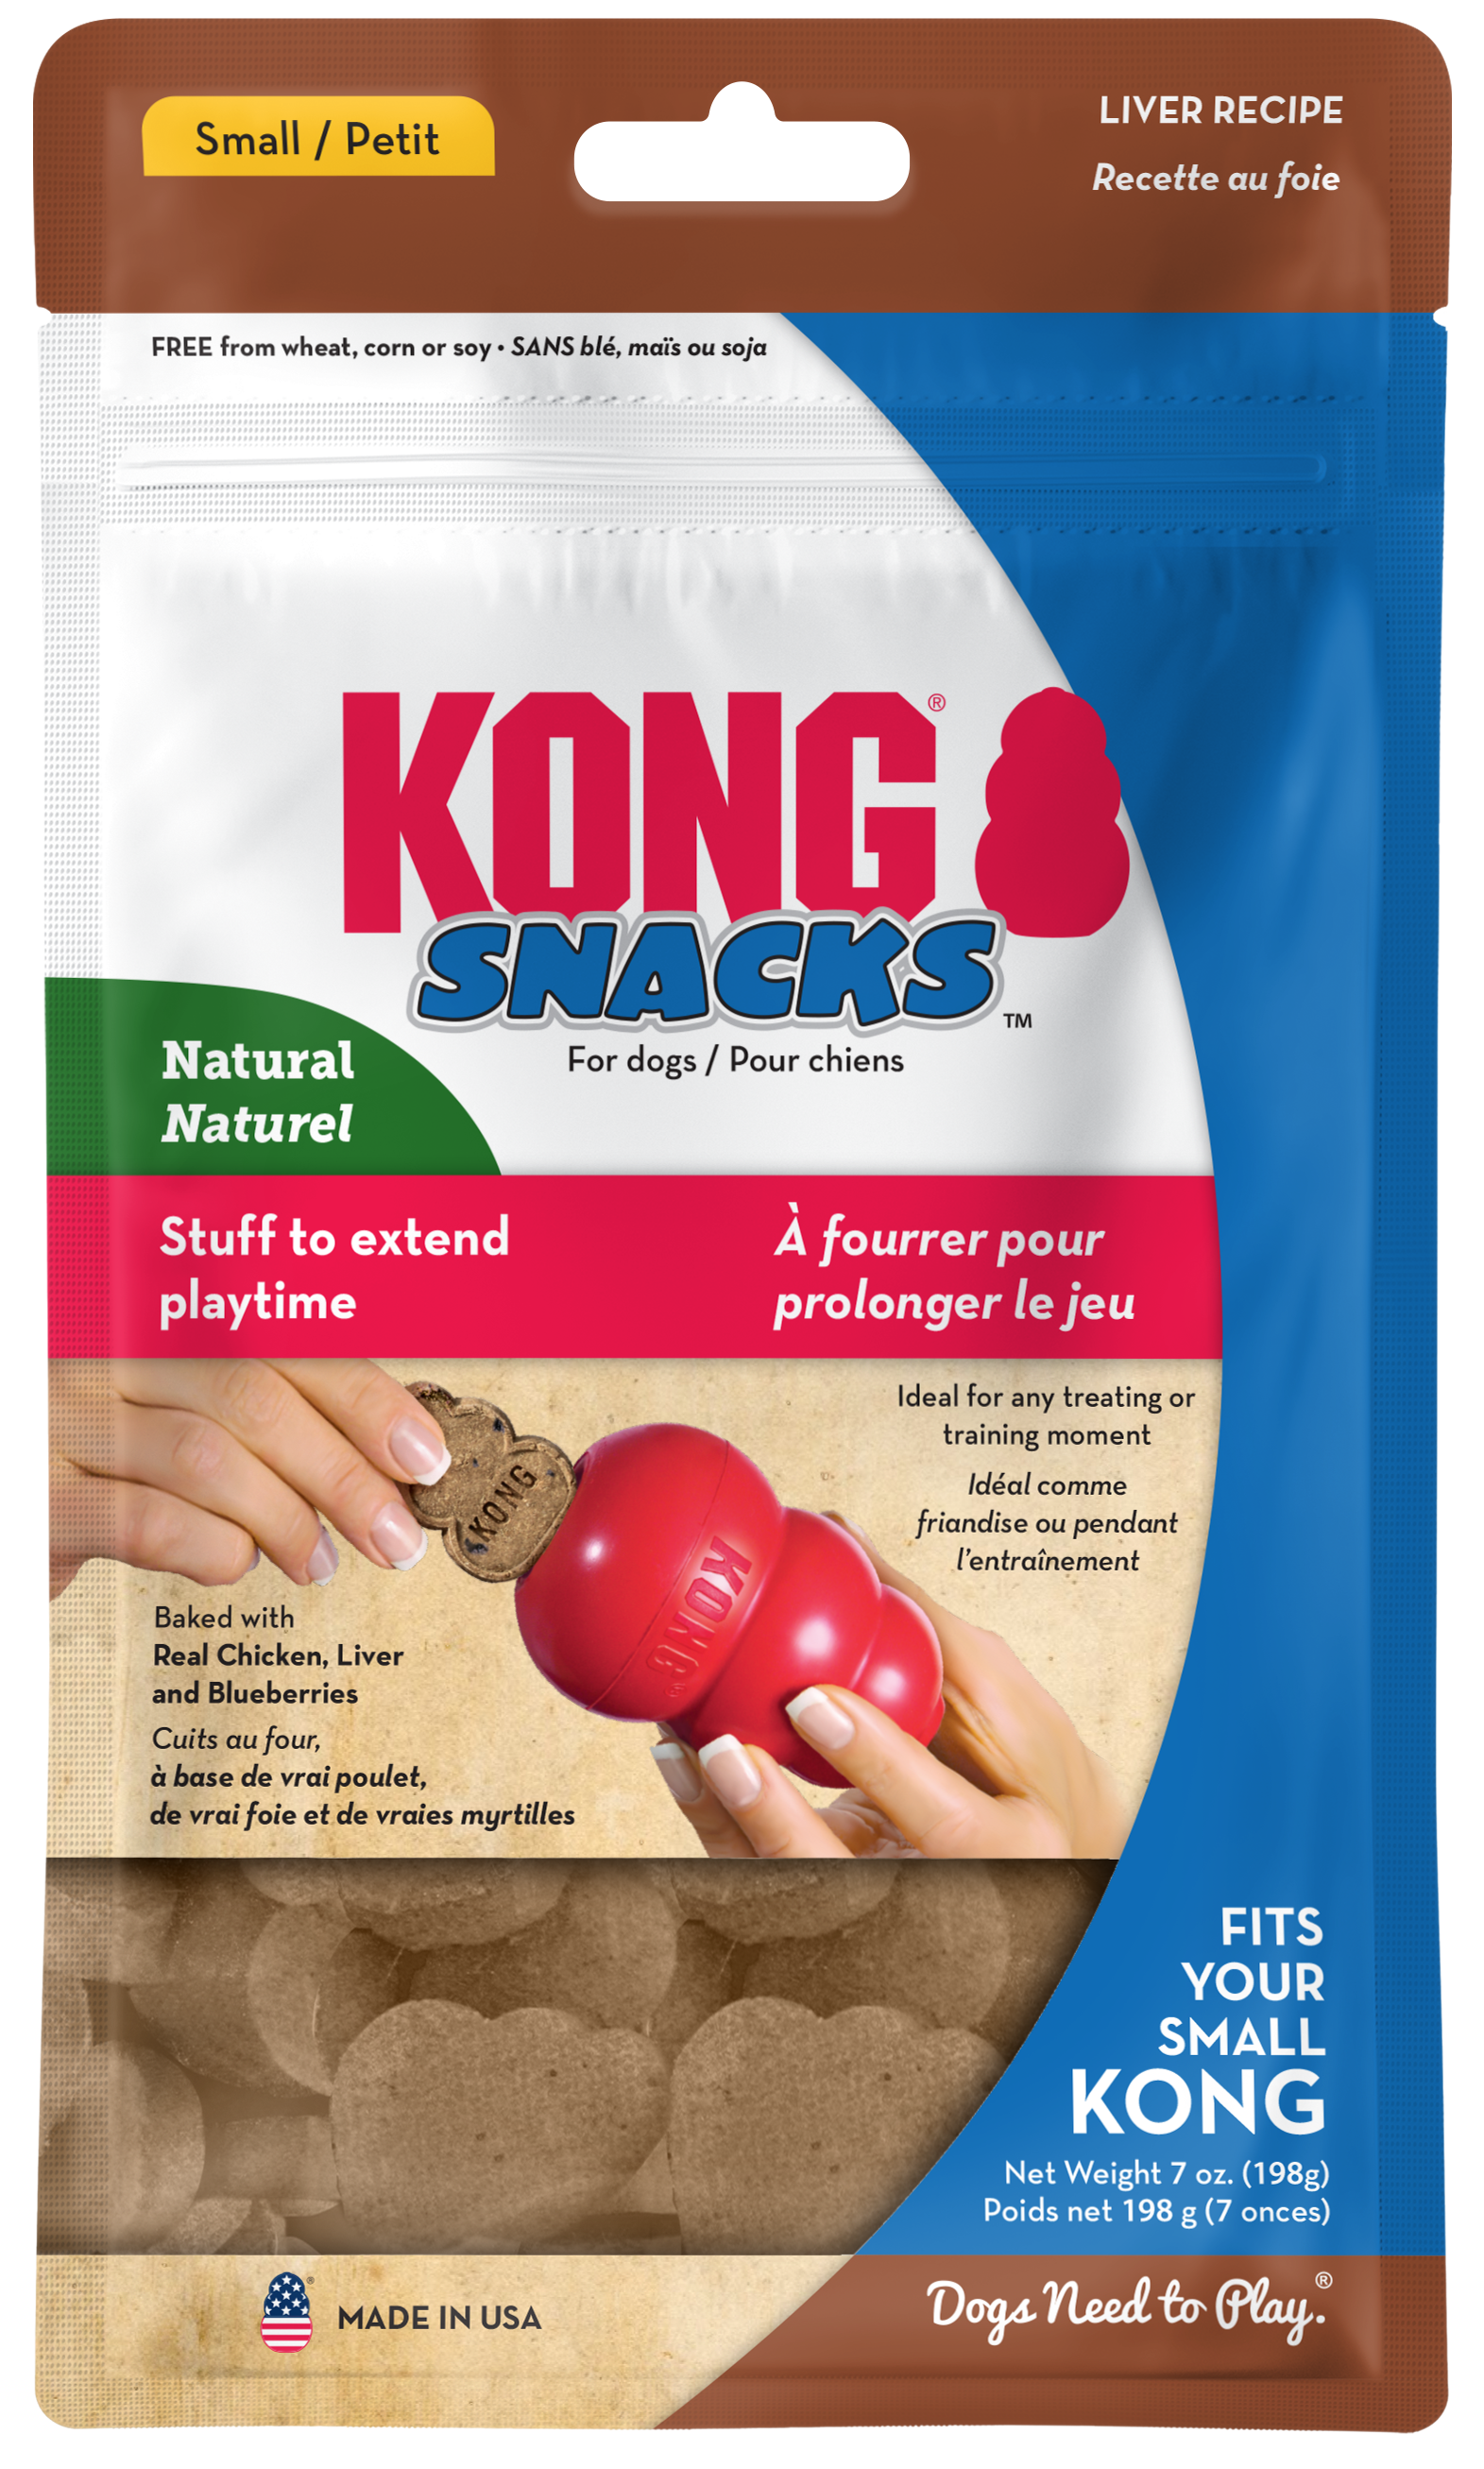 Kong - Snacks - Fits in a Kong